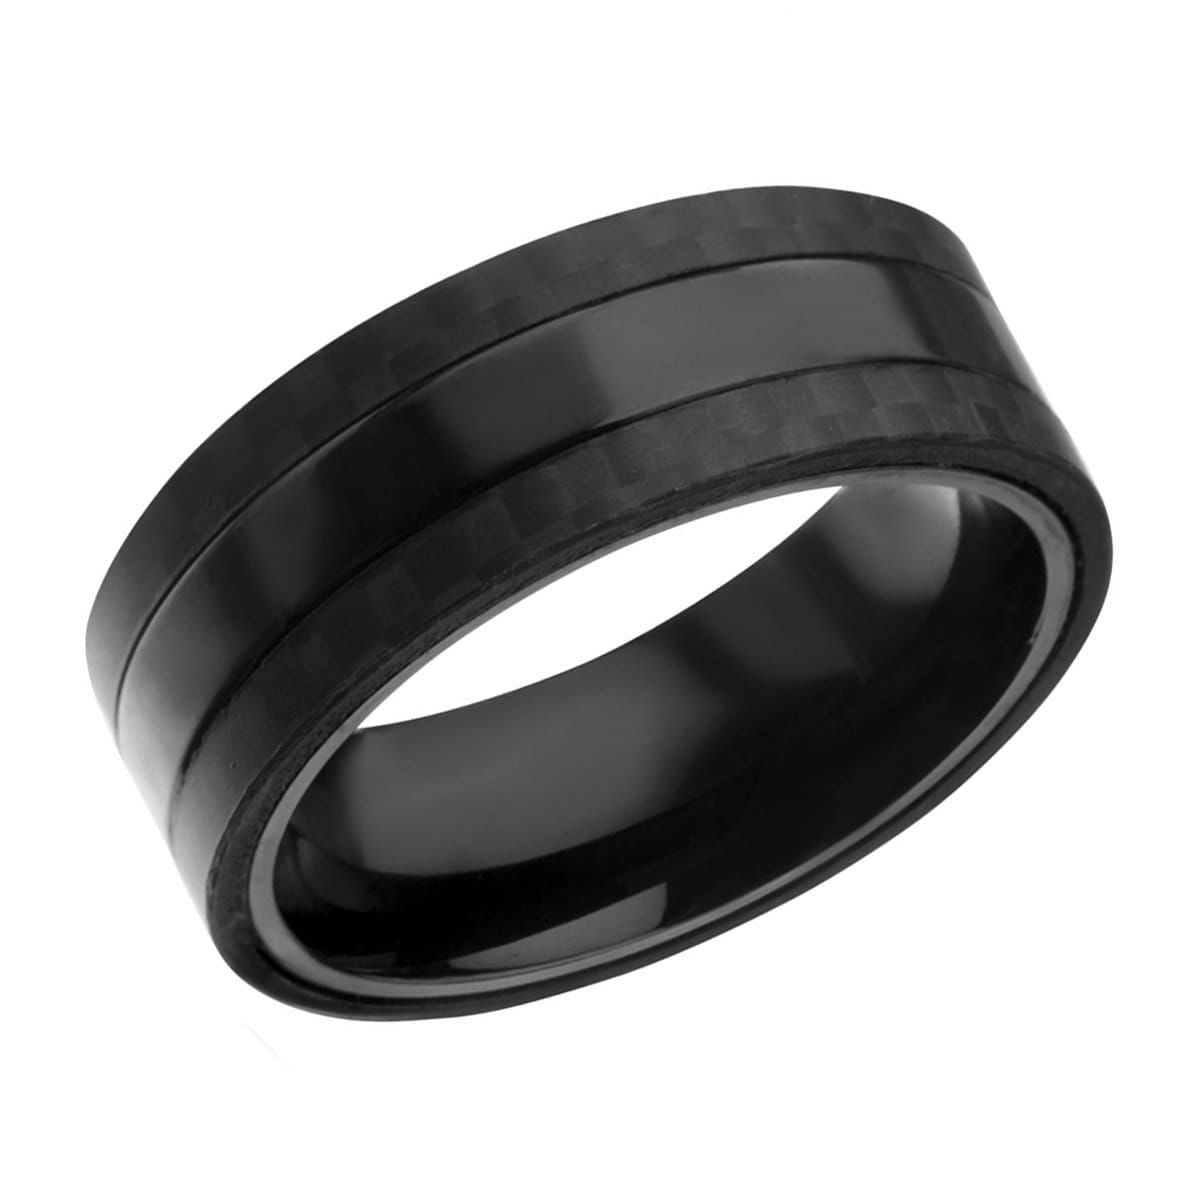 INOX JEWELRY Rings Black Stainless Steel Smooth Band with Carbon Fiber Detail Ring